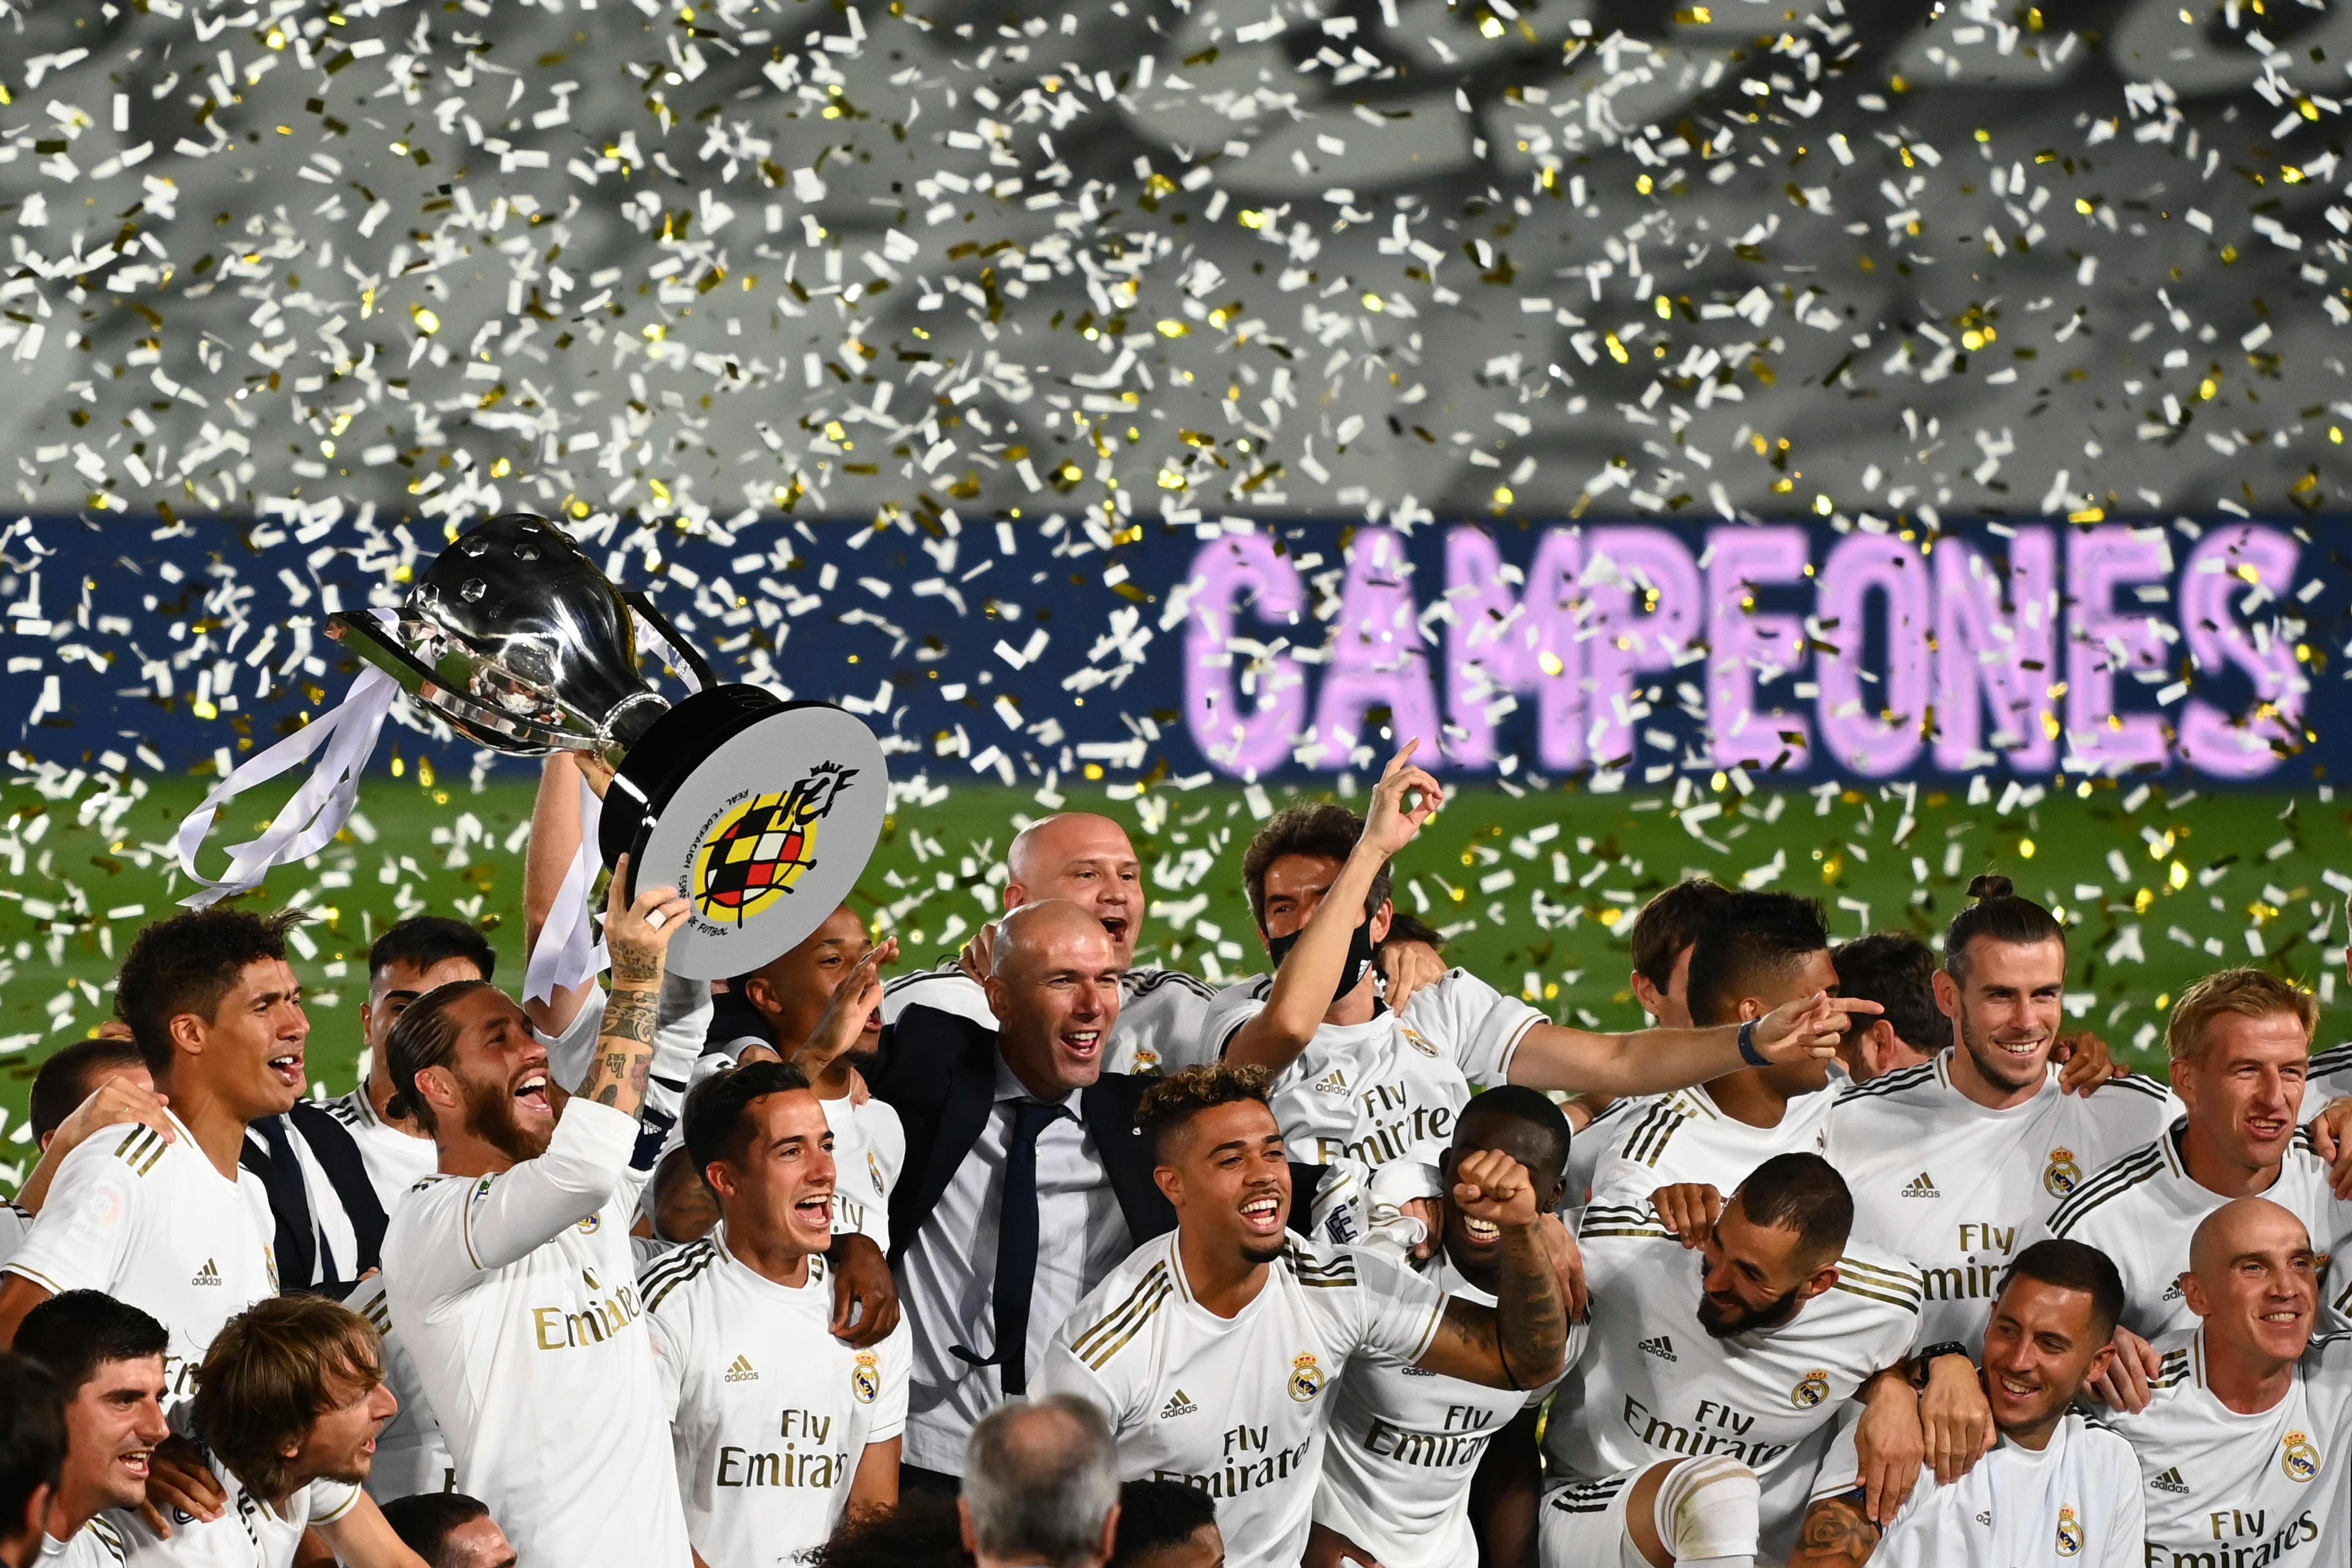 Real Madrid's players celebrate winning the Liga title after the Spanish League football match between Real Madrid CF and Villarreal CF at the Alfredo di Stefano stadium in Valdebebas, on the outskirts of Madrid, on July 16, 2020. Credit: AFP